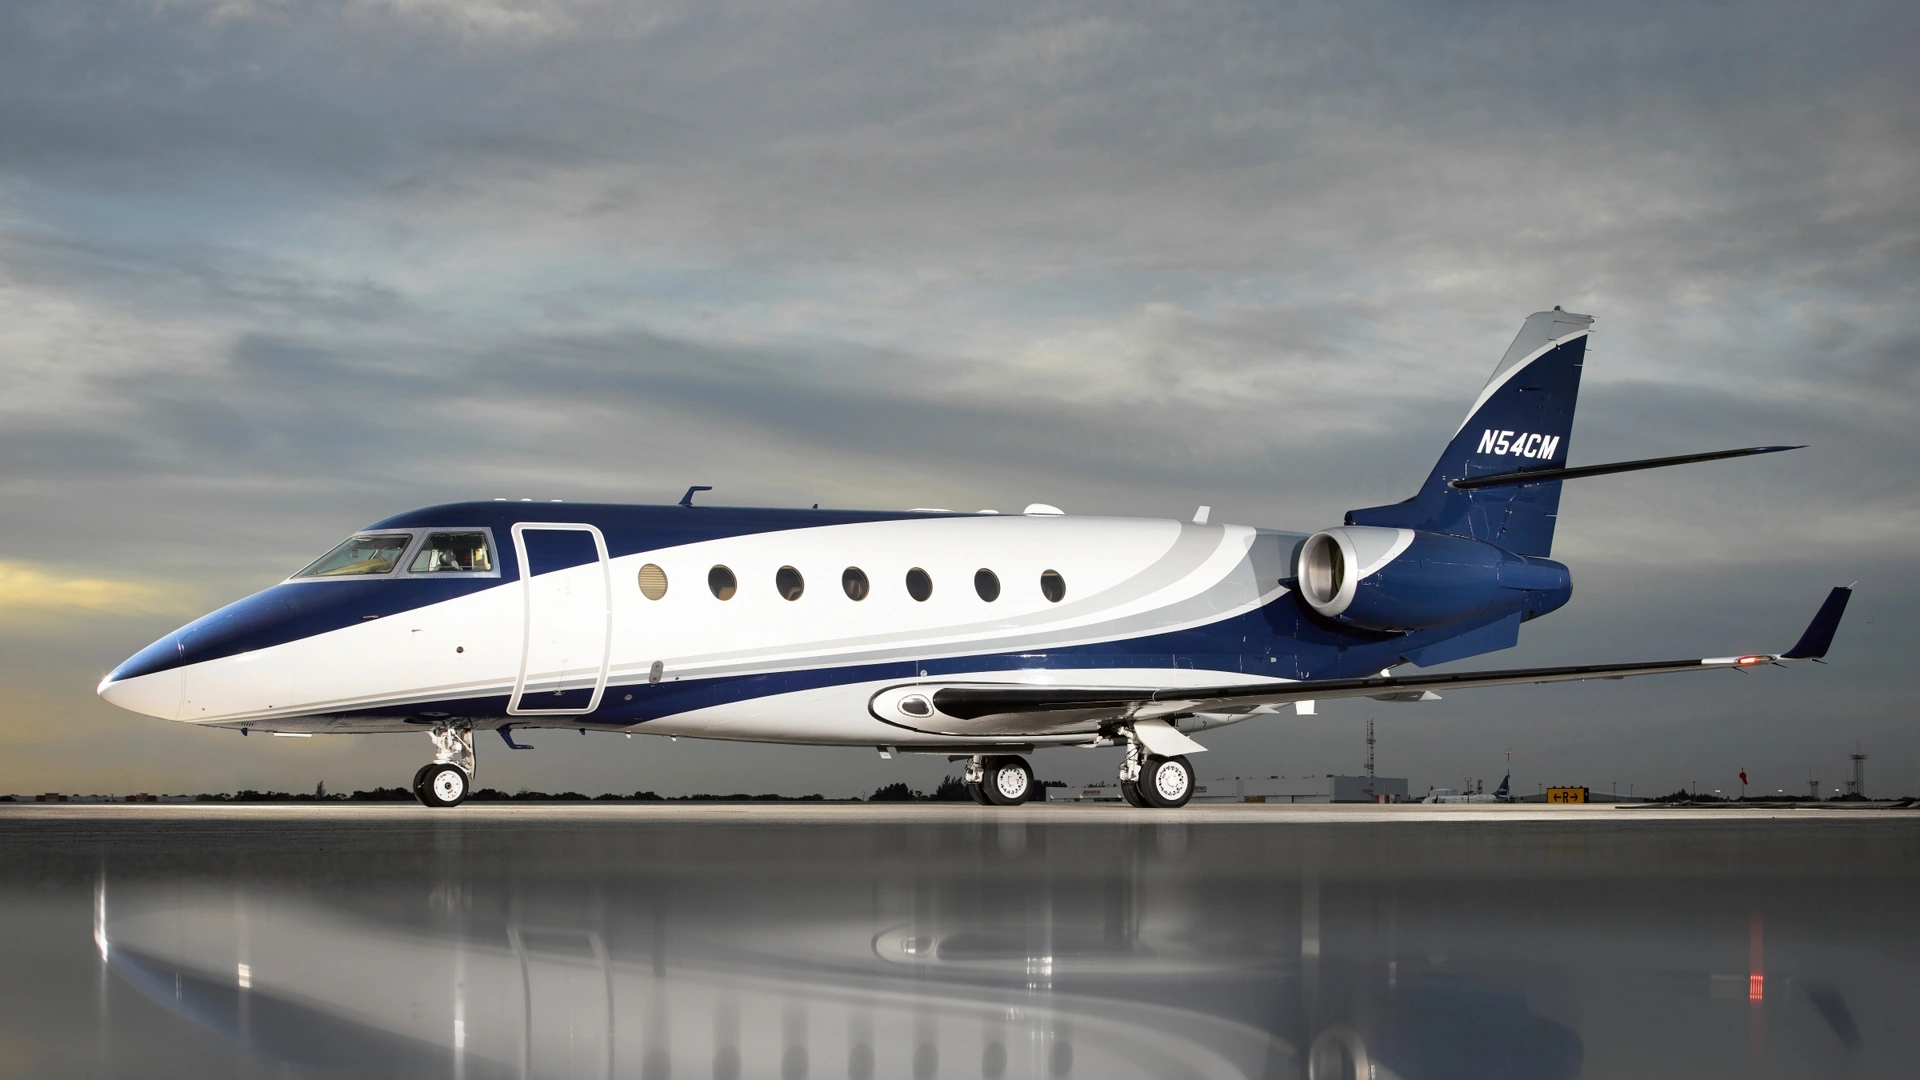 Alerion Gulfstream G200 - N54CM available for private charter by Alerion Aviation.